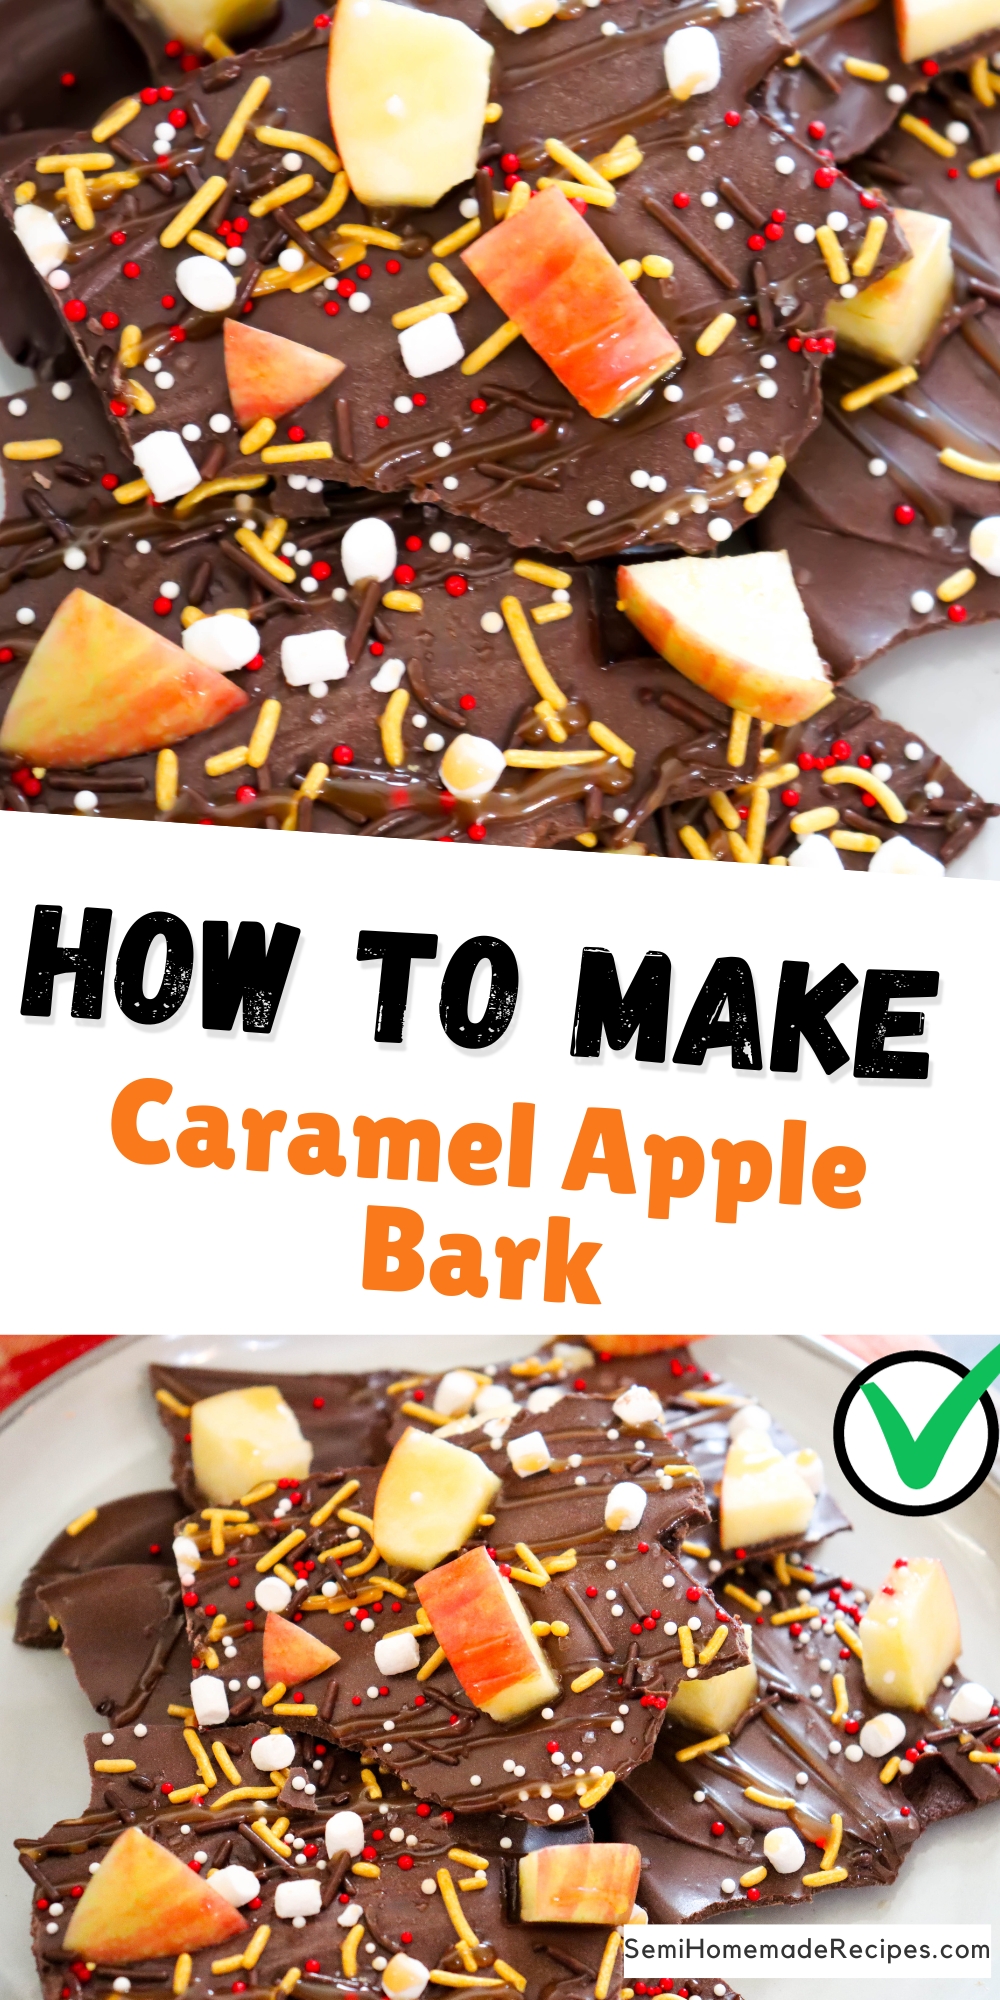 This fun Caramel Apple Bark is super simple to make and combined the great flavors of chocolate caramel apples in a bite sized treat. 